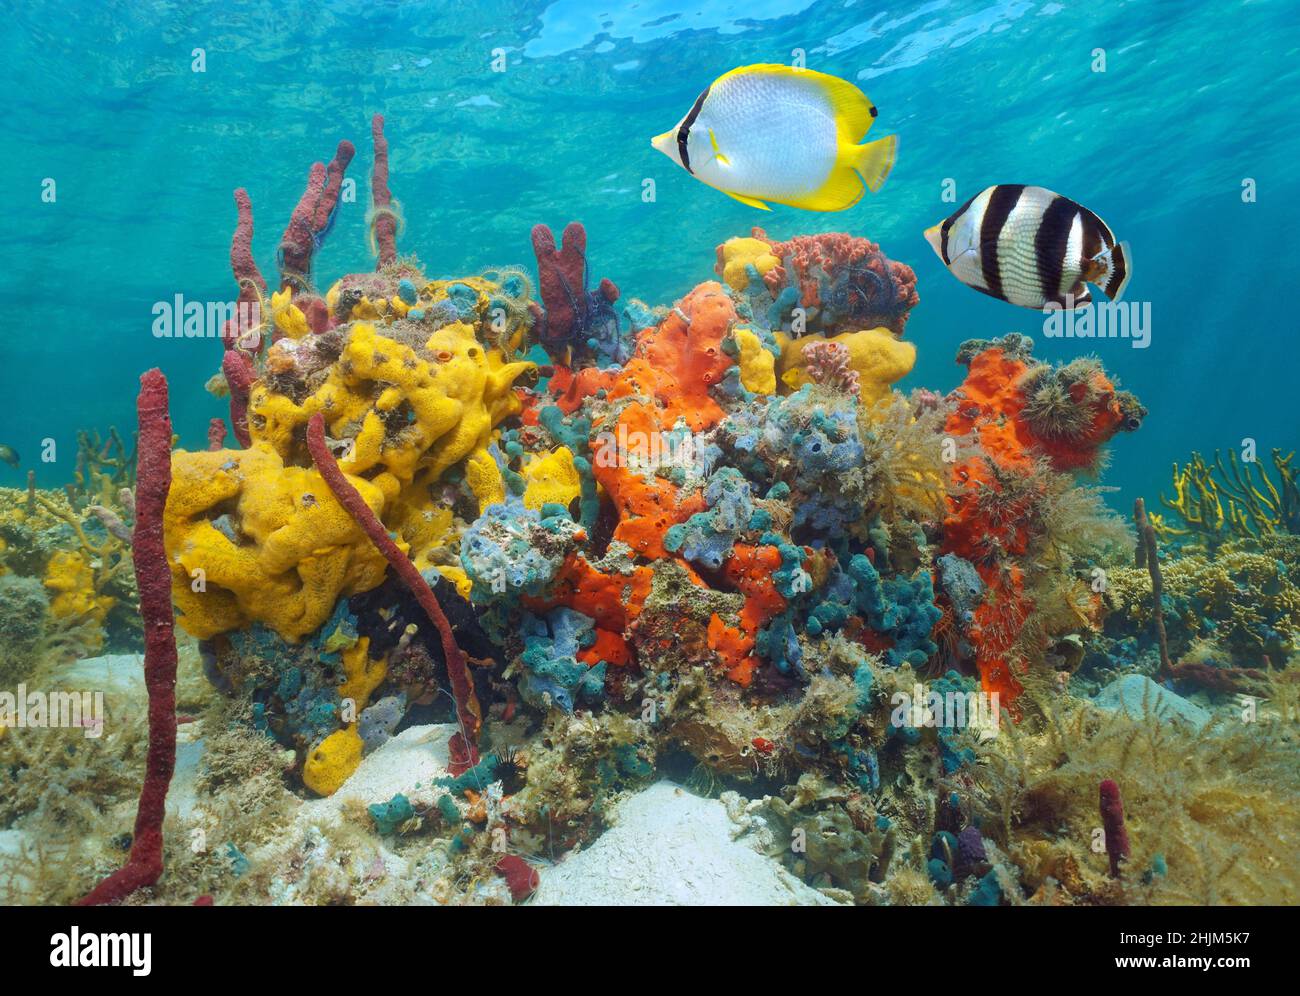 Colorful sea life underwater, various sponges with tropical fish, Caribbean sea Stock Photo